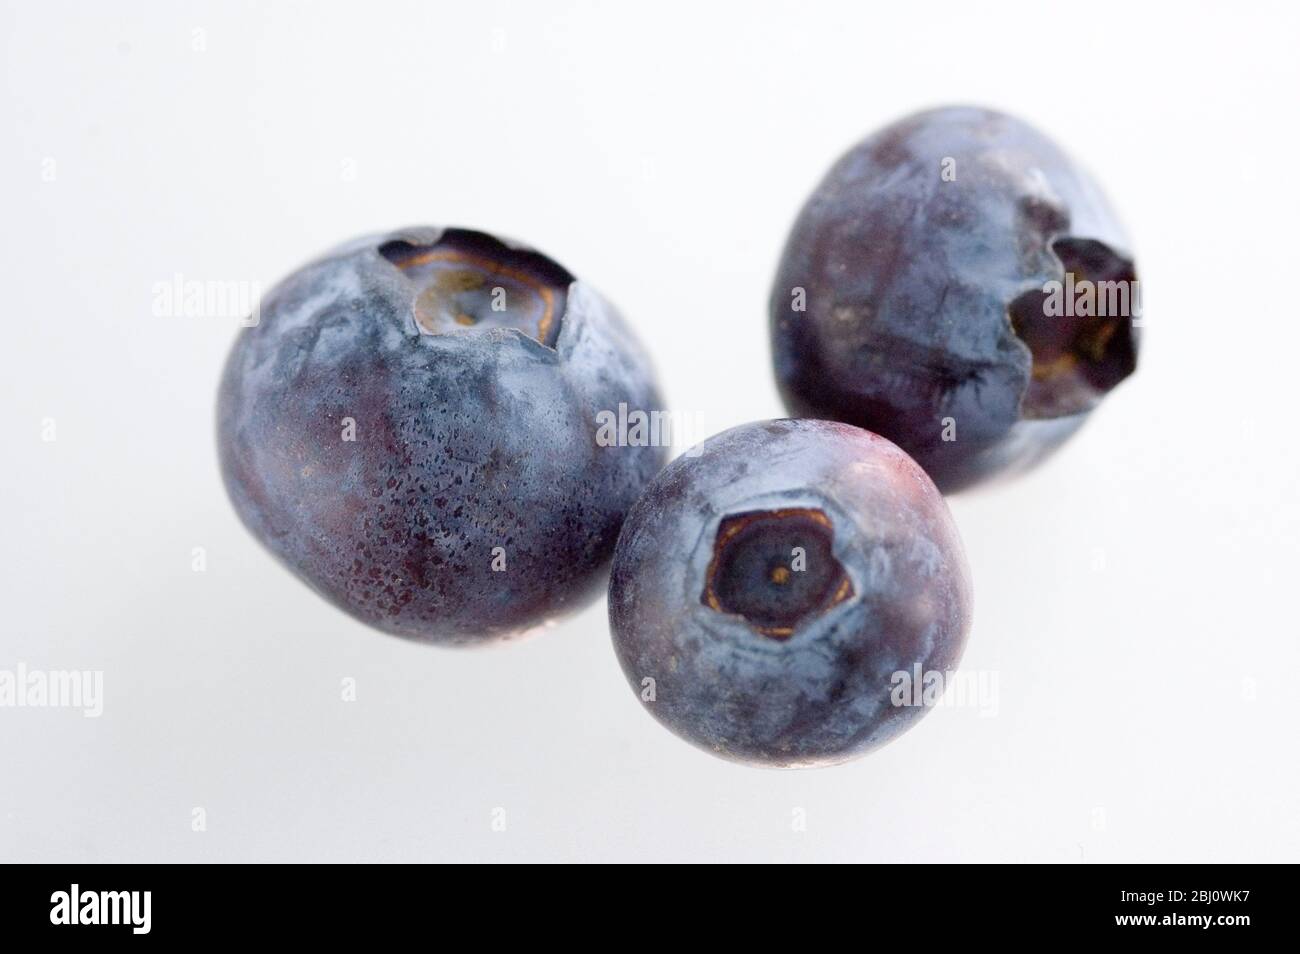 Three blueberries close up on white glass surface. Stock Photo